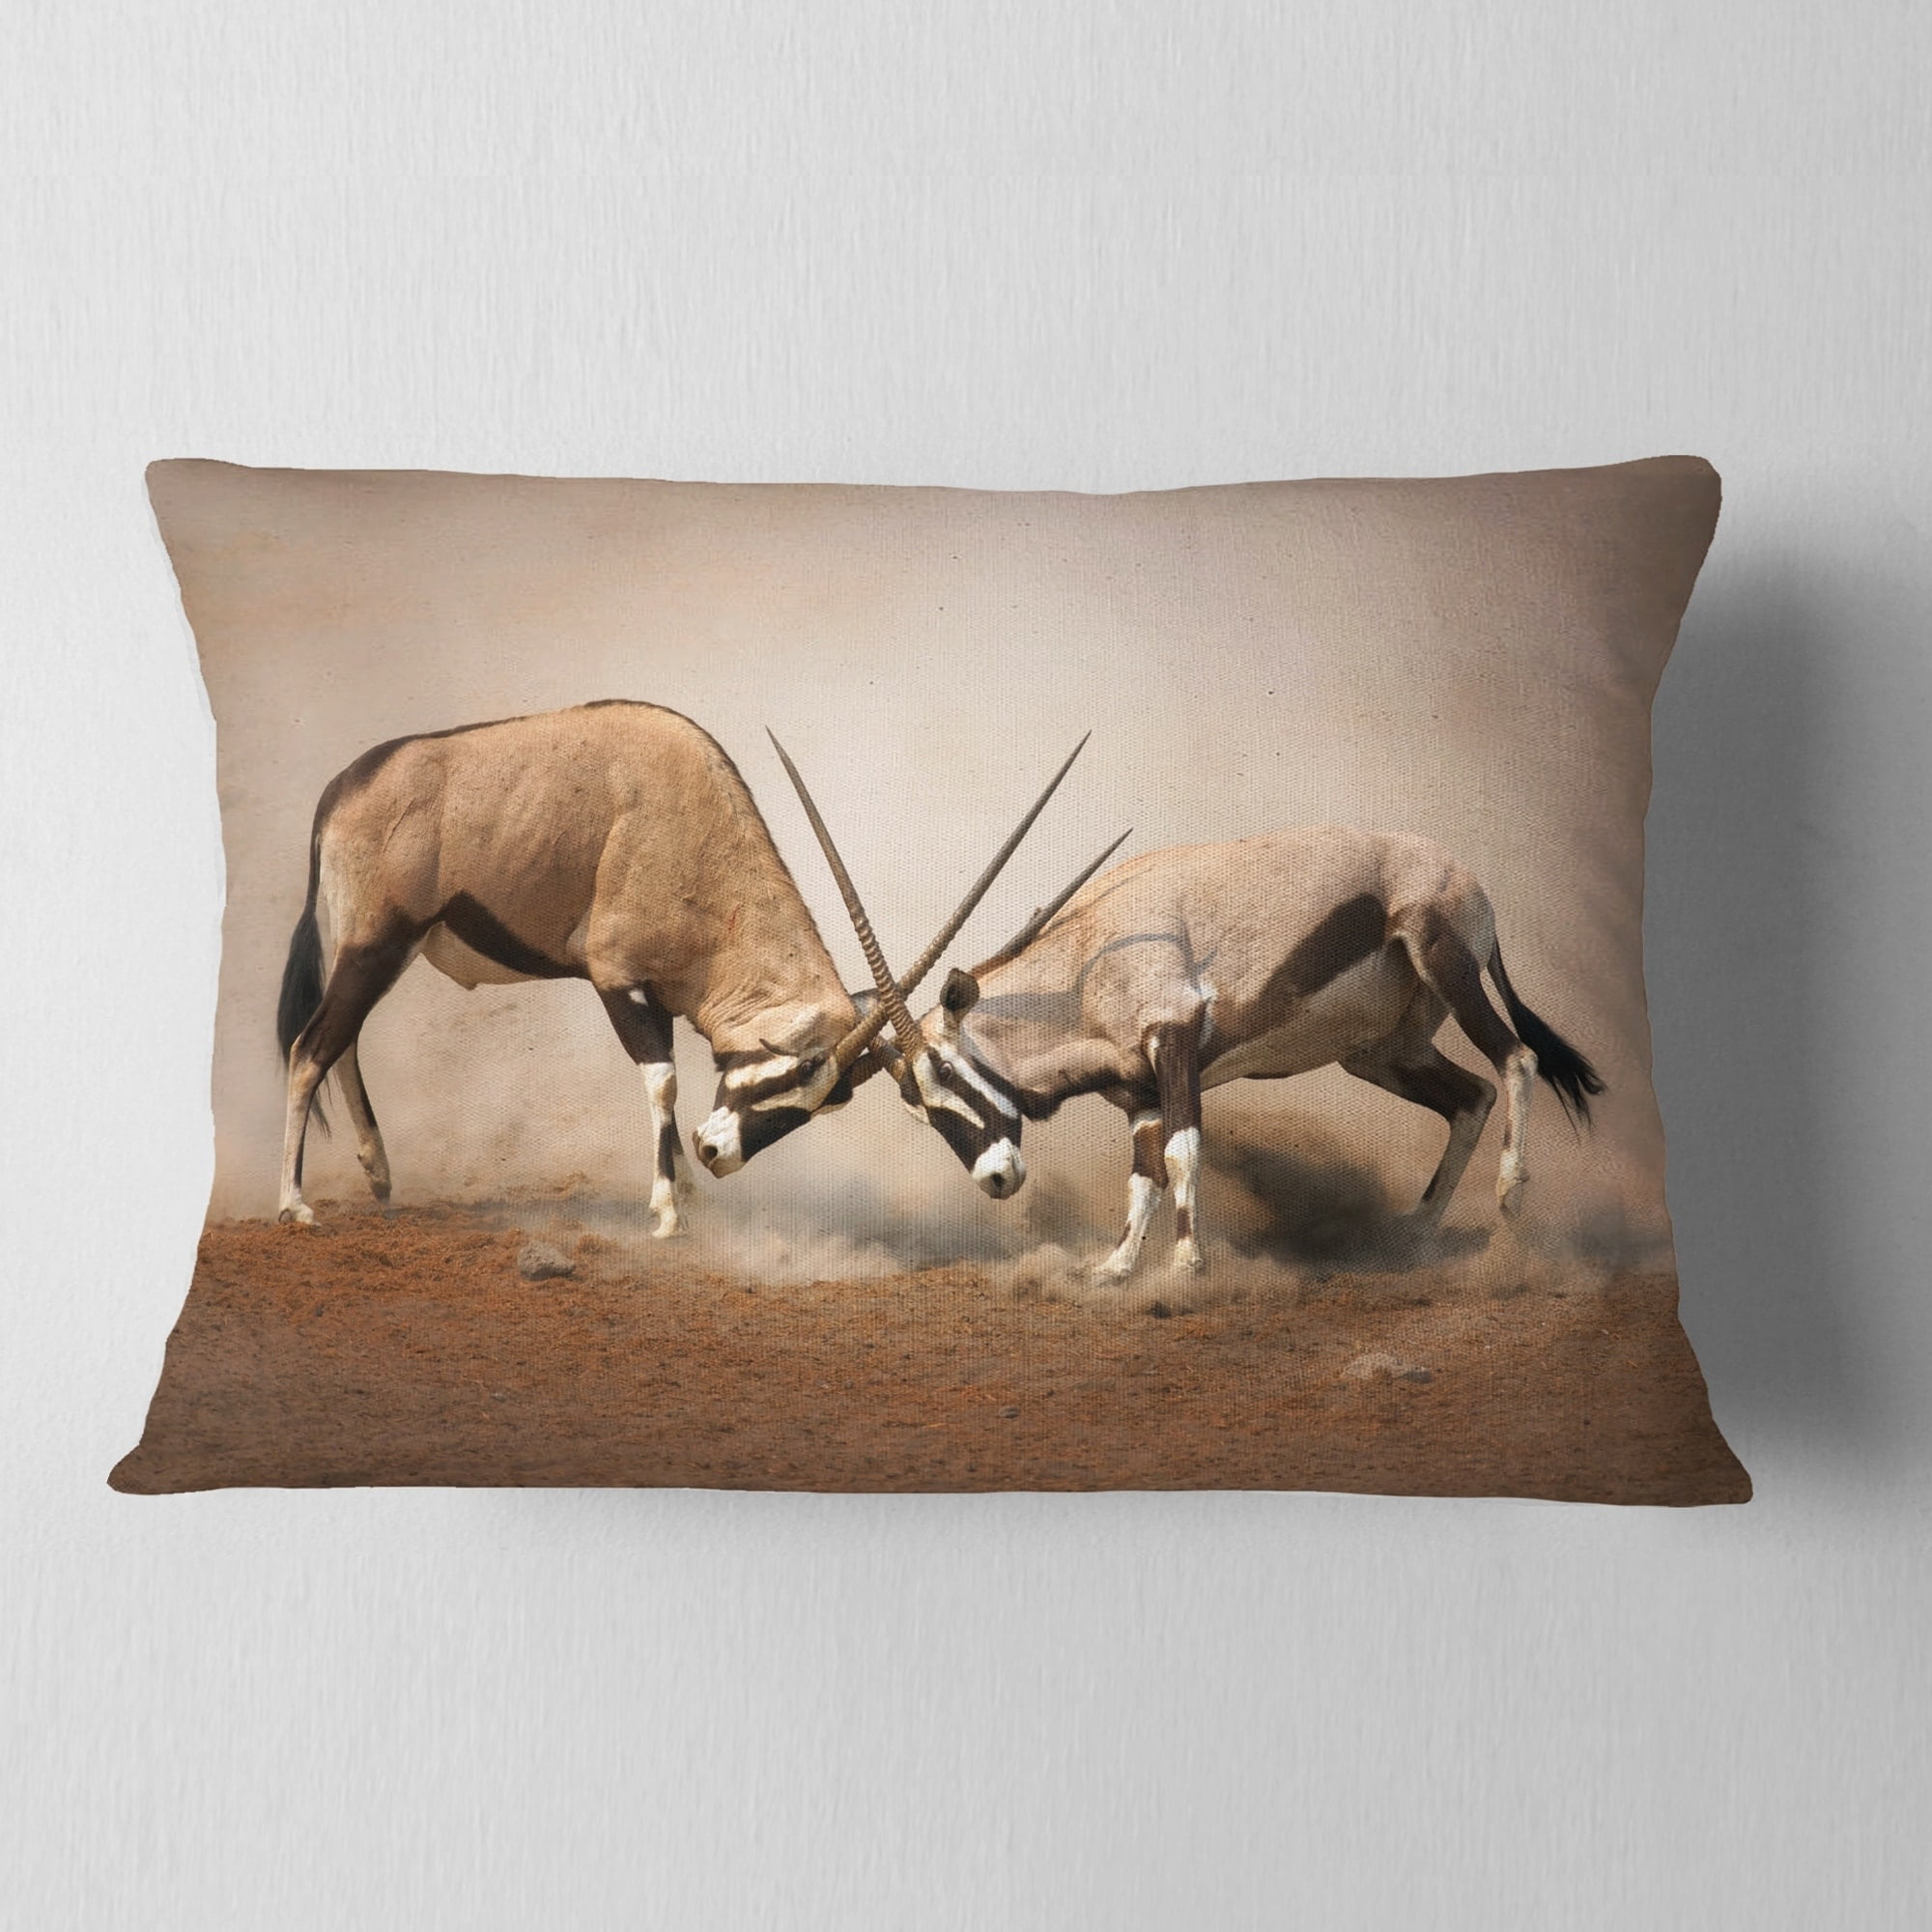 Designart CU13265-16-16 Gemsbok Antelopes Fighting African Wall Cushion Cover for Living Room in x 16 in Insert Printed On Both Side Sofa Throw Pillow 16 in